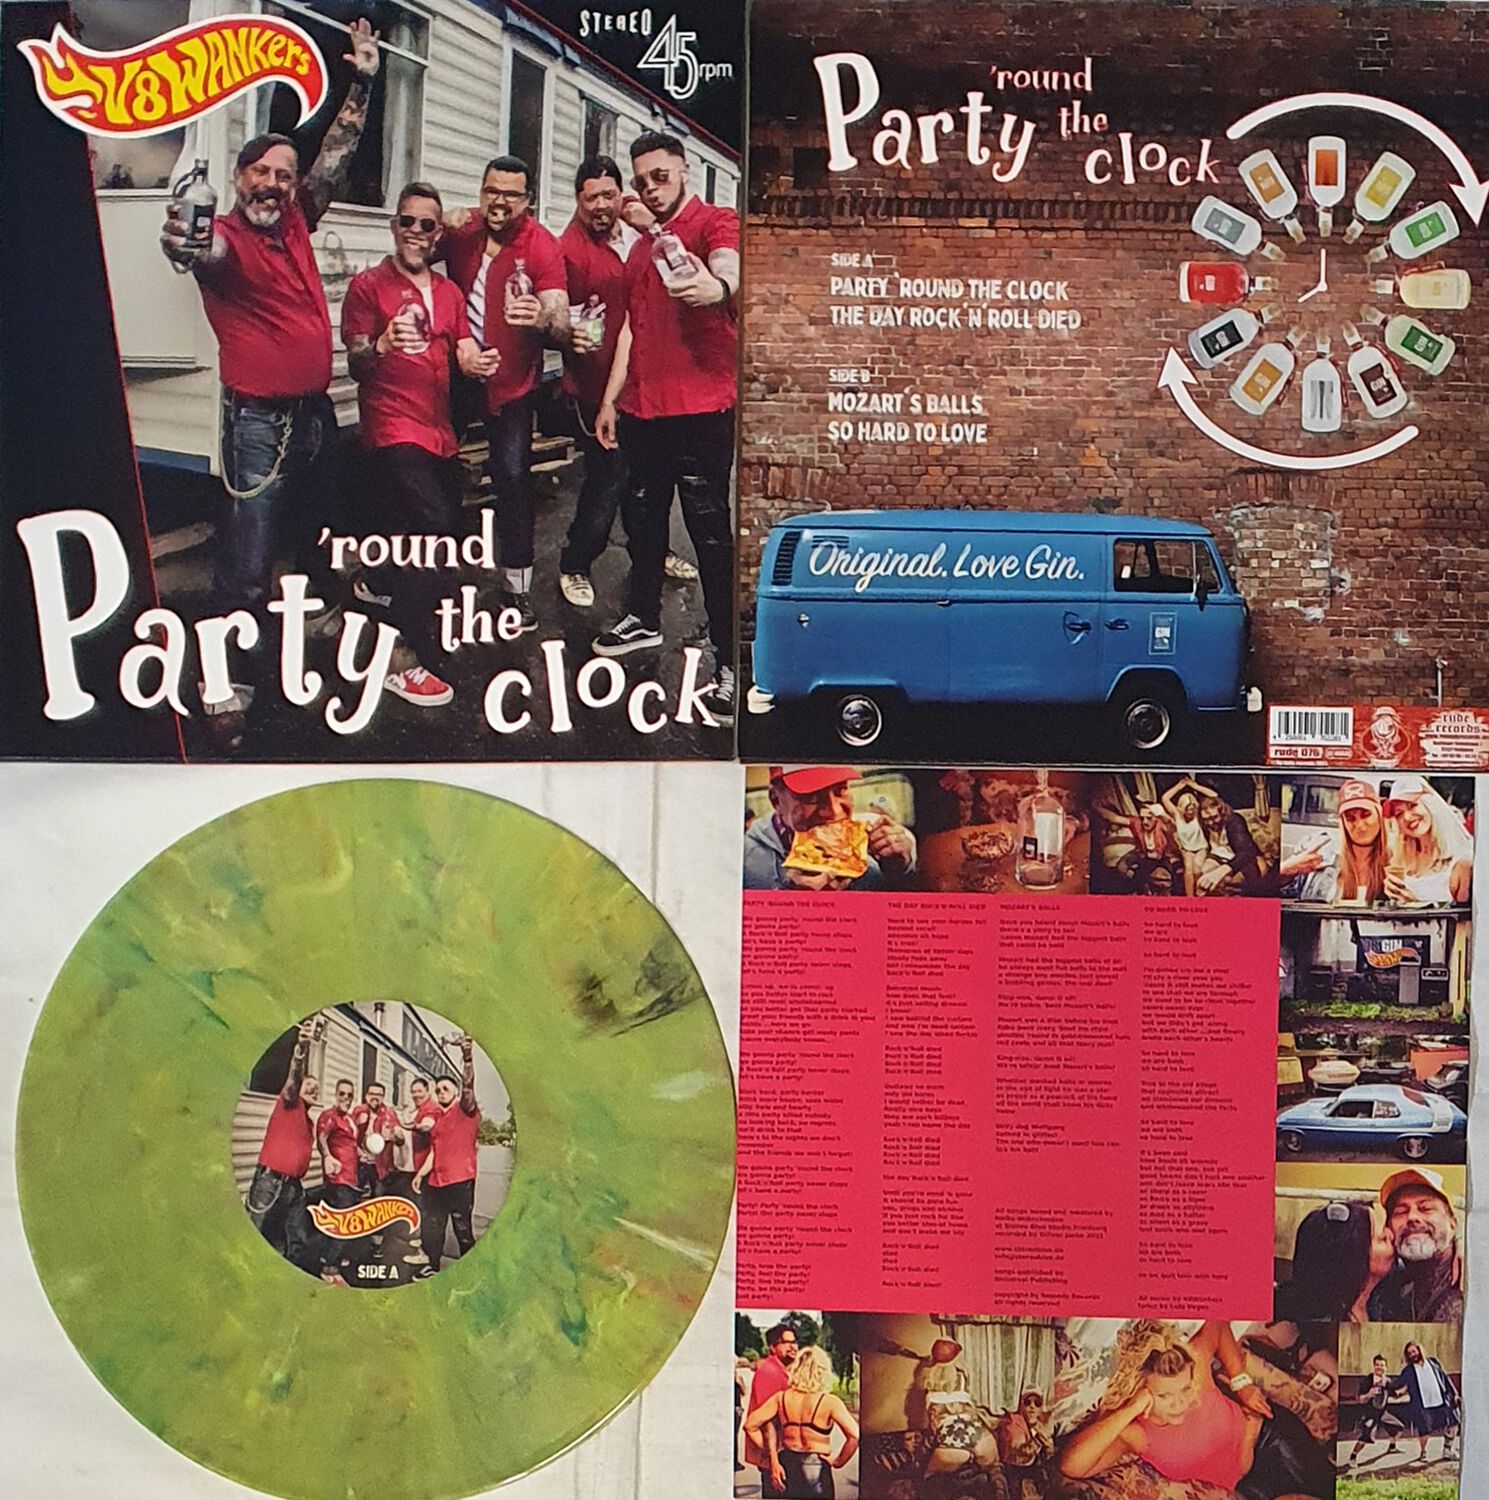 Party 'round the clock von V8 Wankers - "10"-MAXI" (Coloured, Limited Edition, Standard) von V8 Wankers